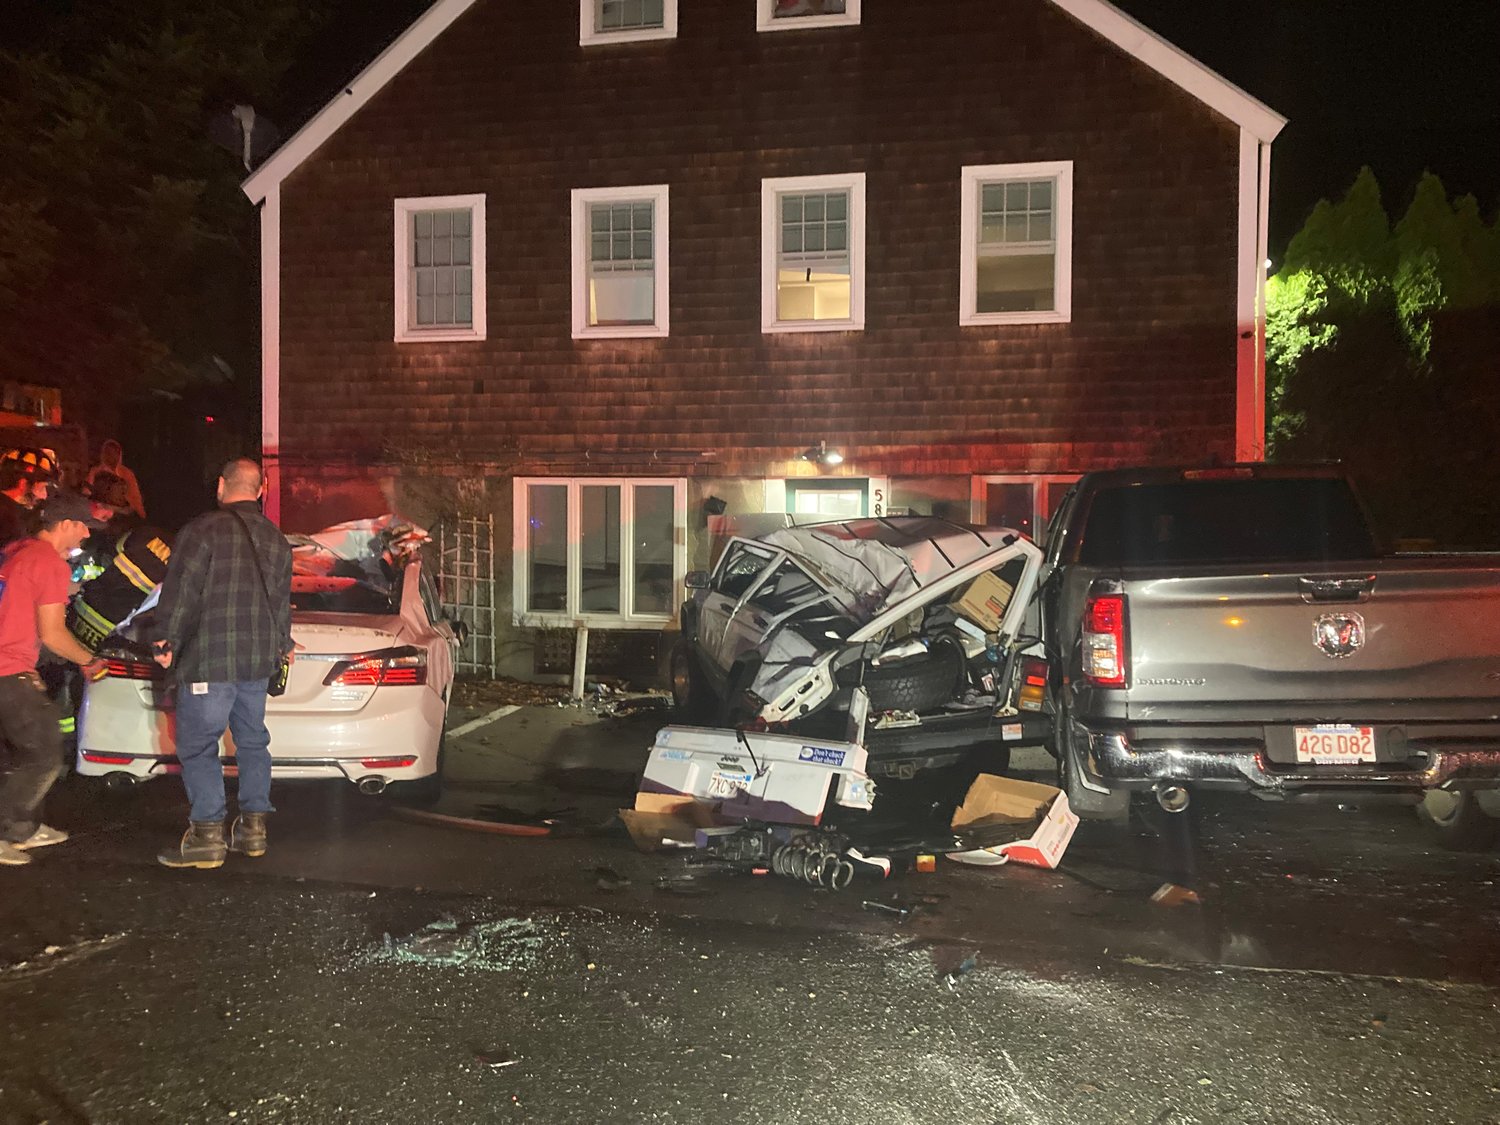 The aftermath of a car crash on Old South Road Tuesday night in which two cars, one parked, were overturned, and a parked Jeep heavily damaged.